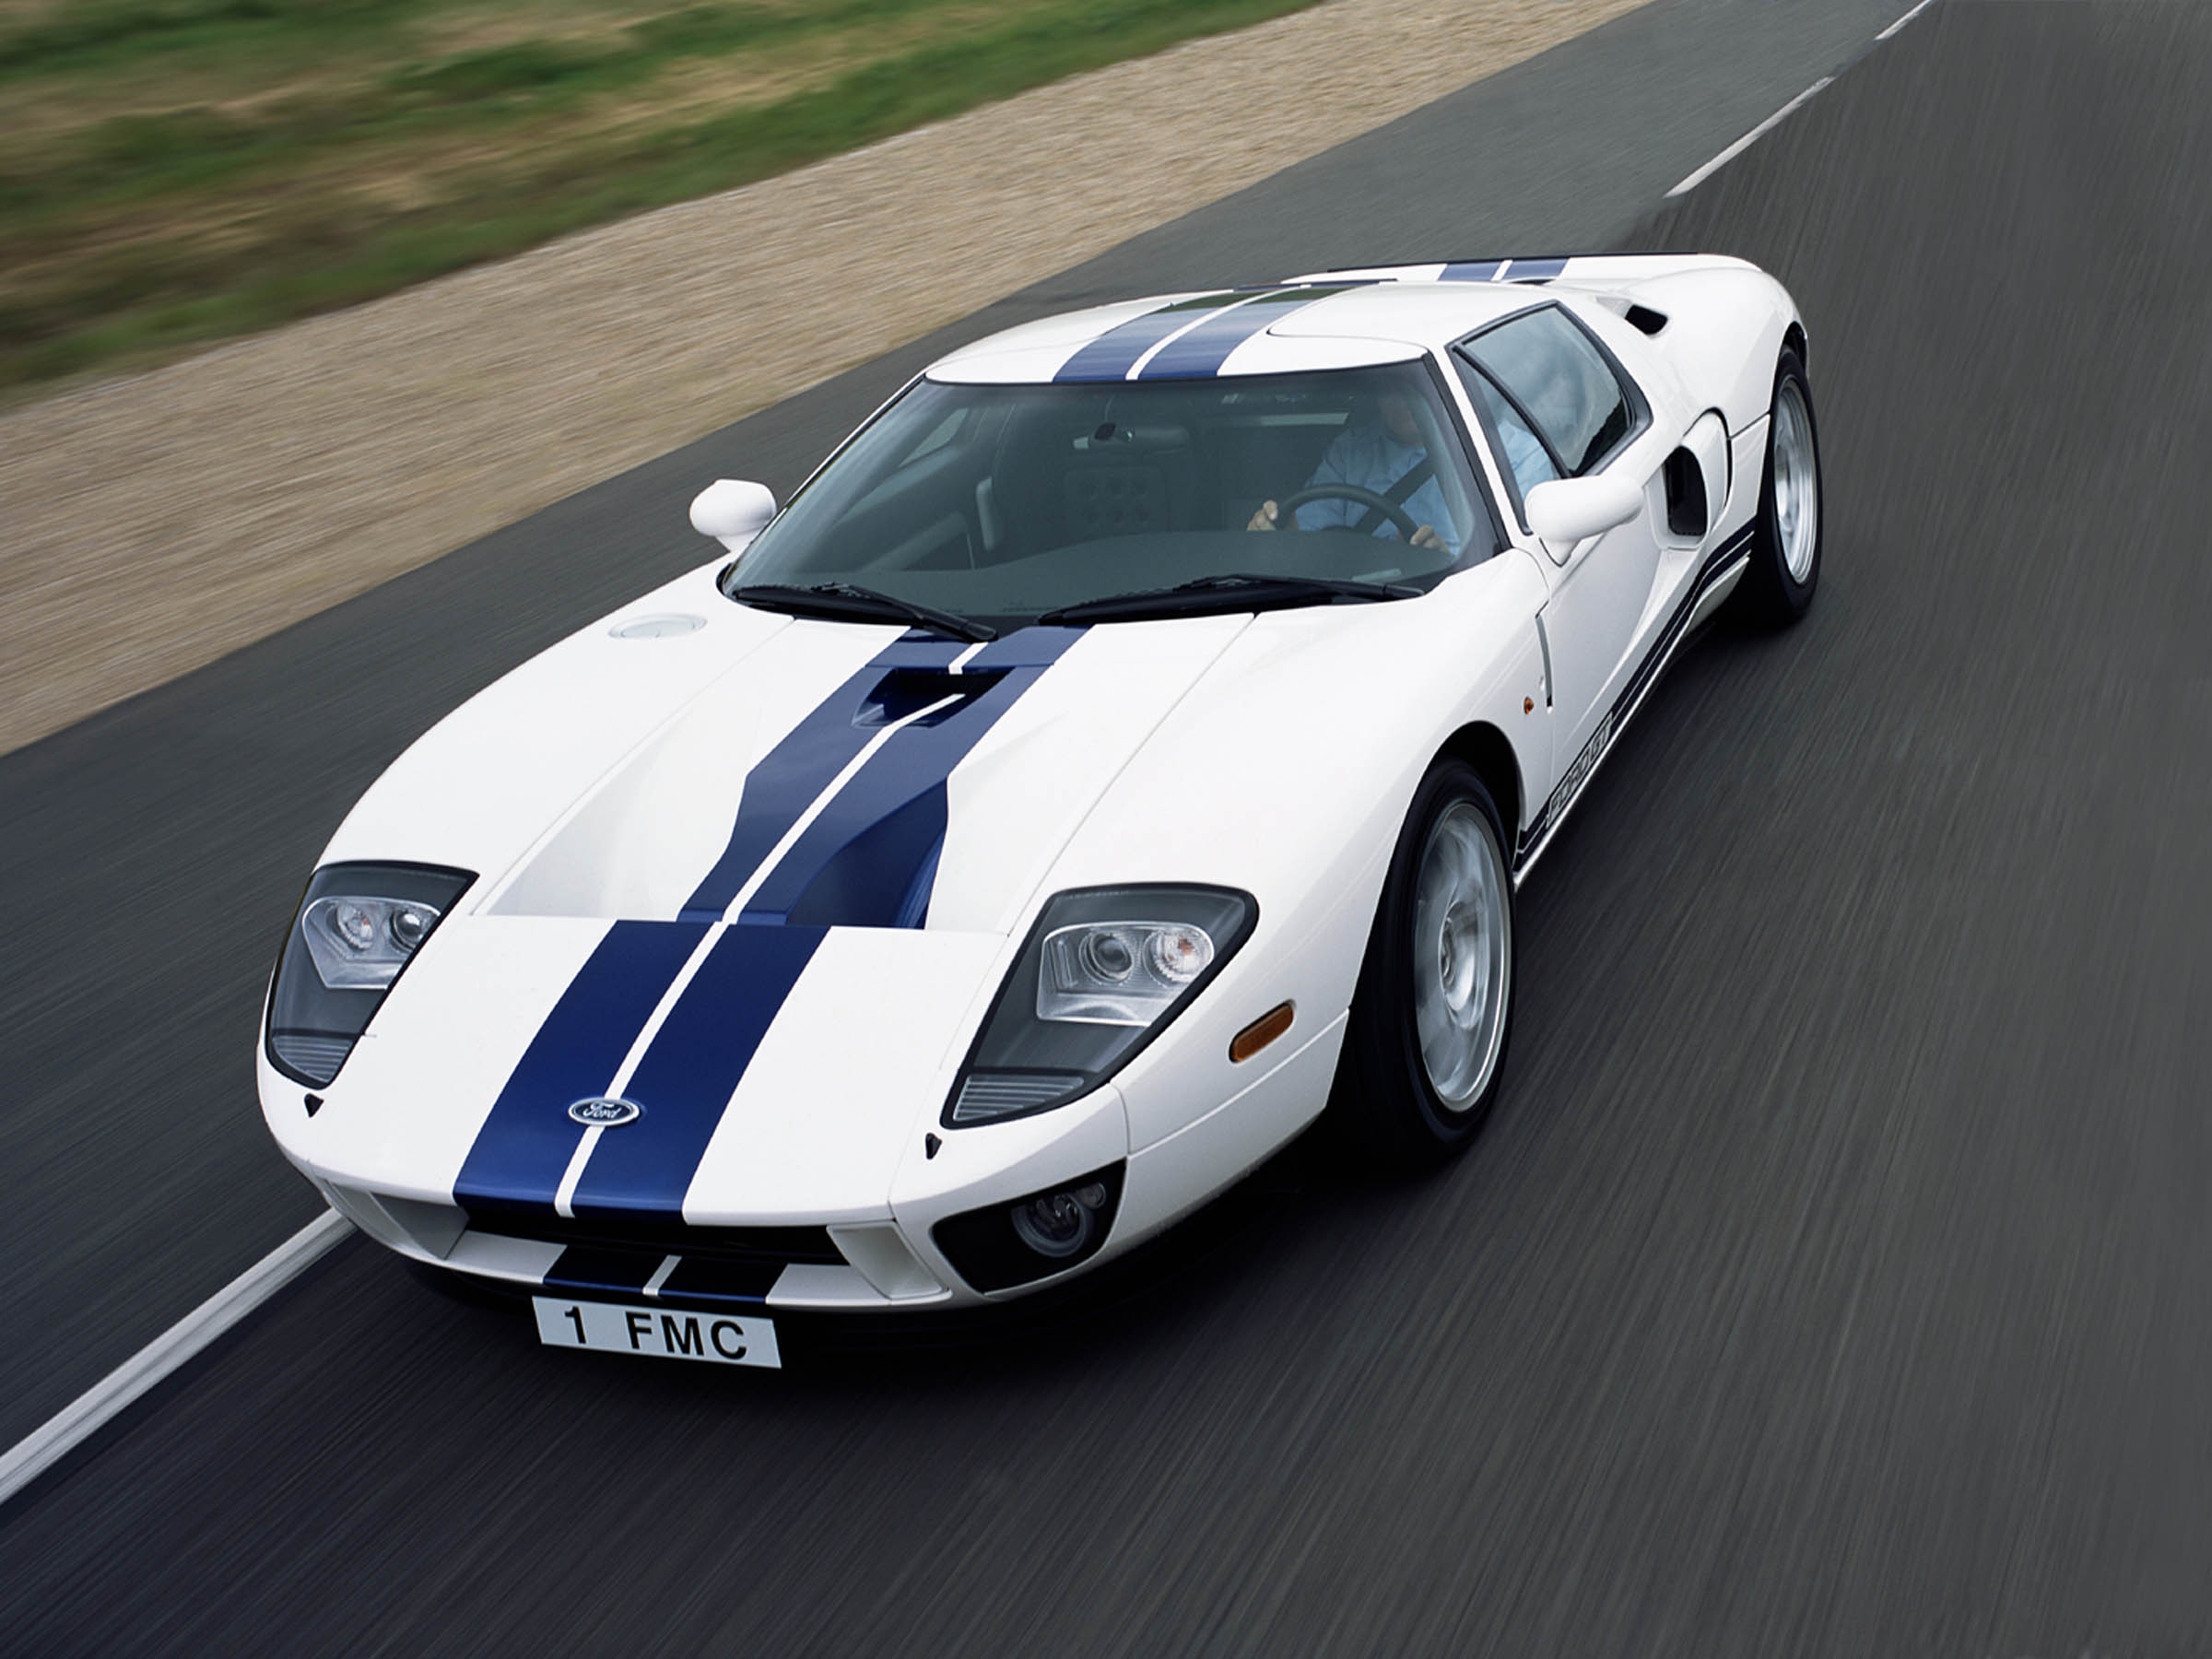 The Ford GT took on the spirit of the original GT40